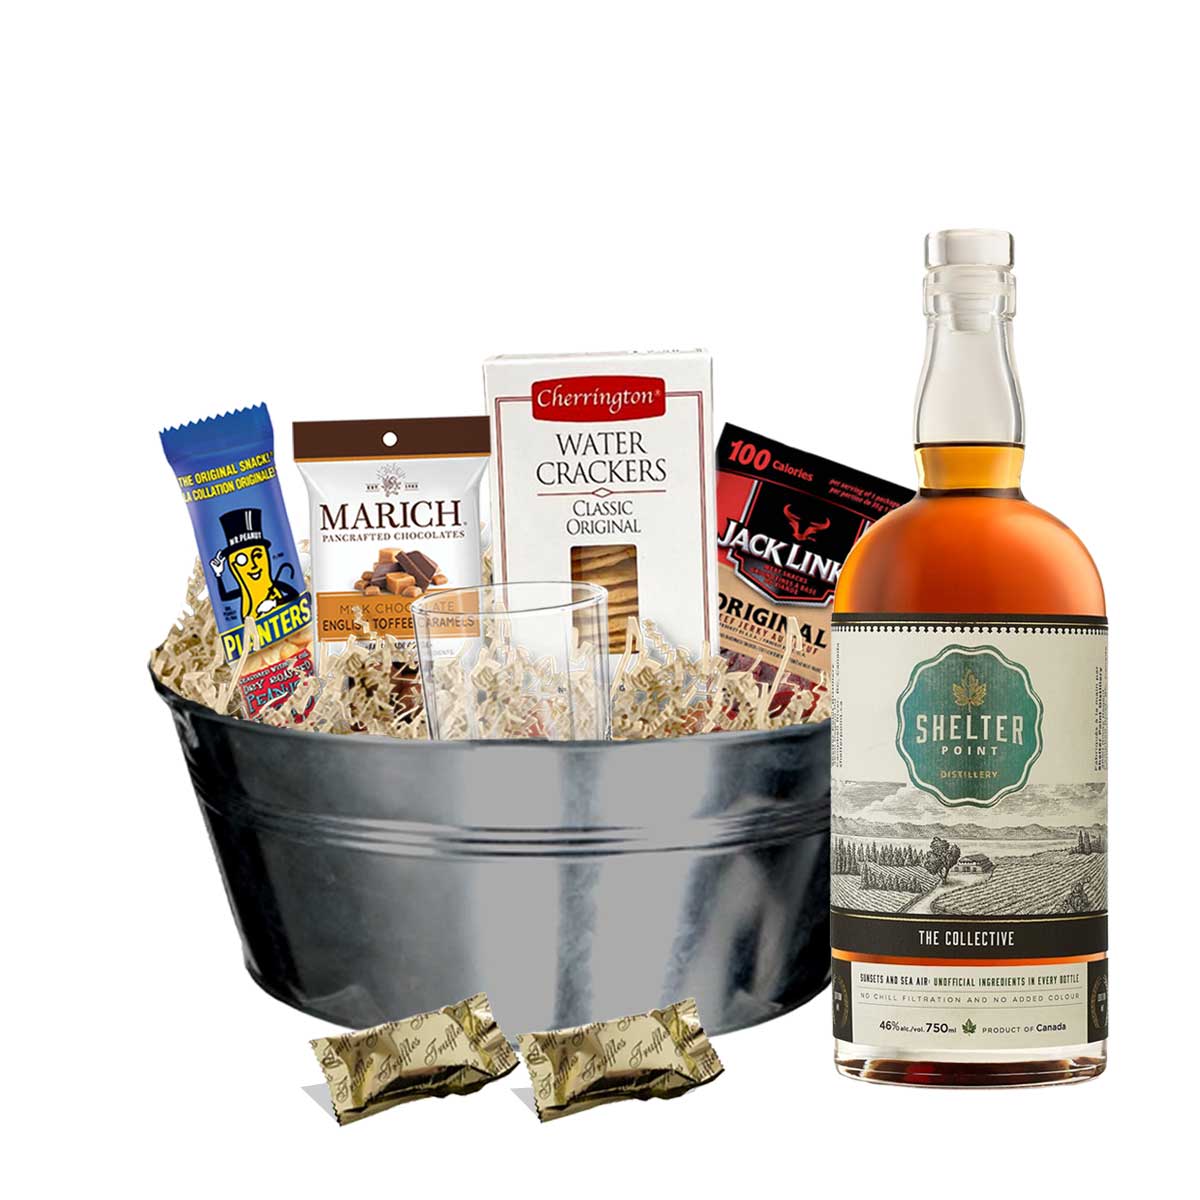 TAG Liquor Stores BC - Shelter Point The Collective Whisky 750ml Gift Basket